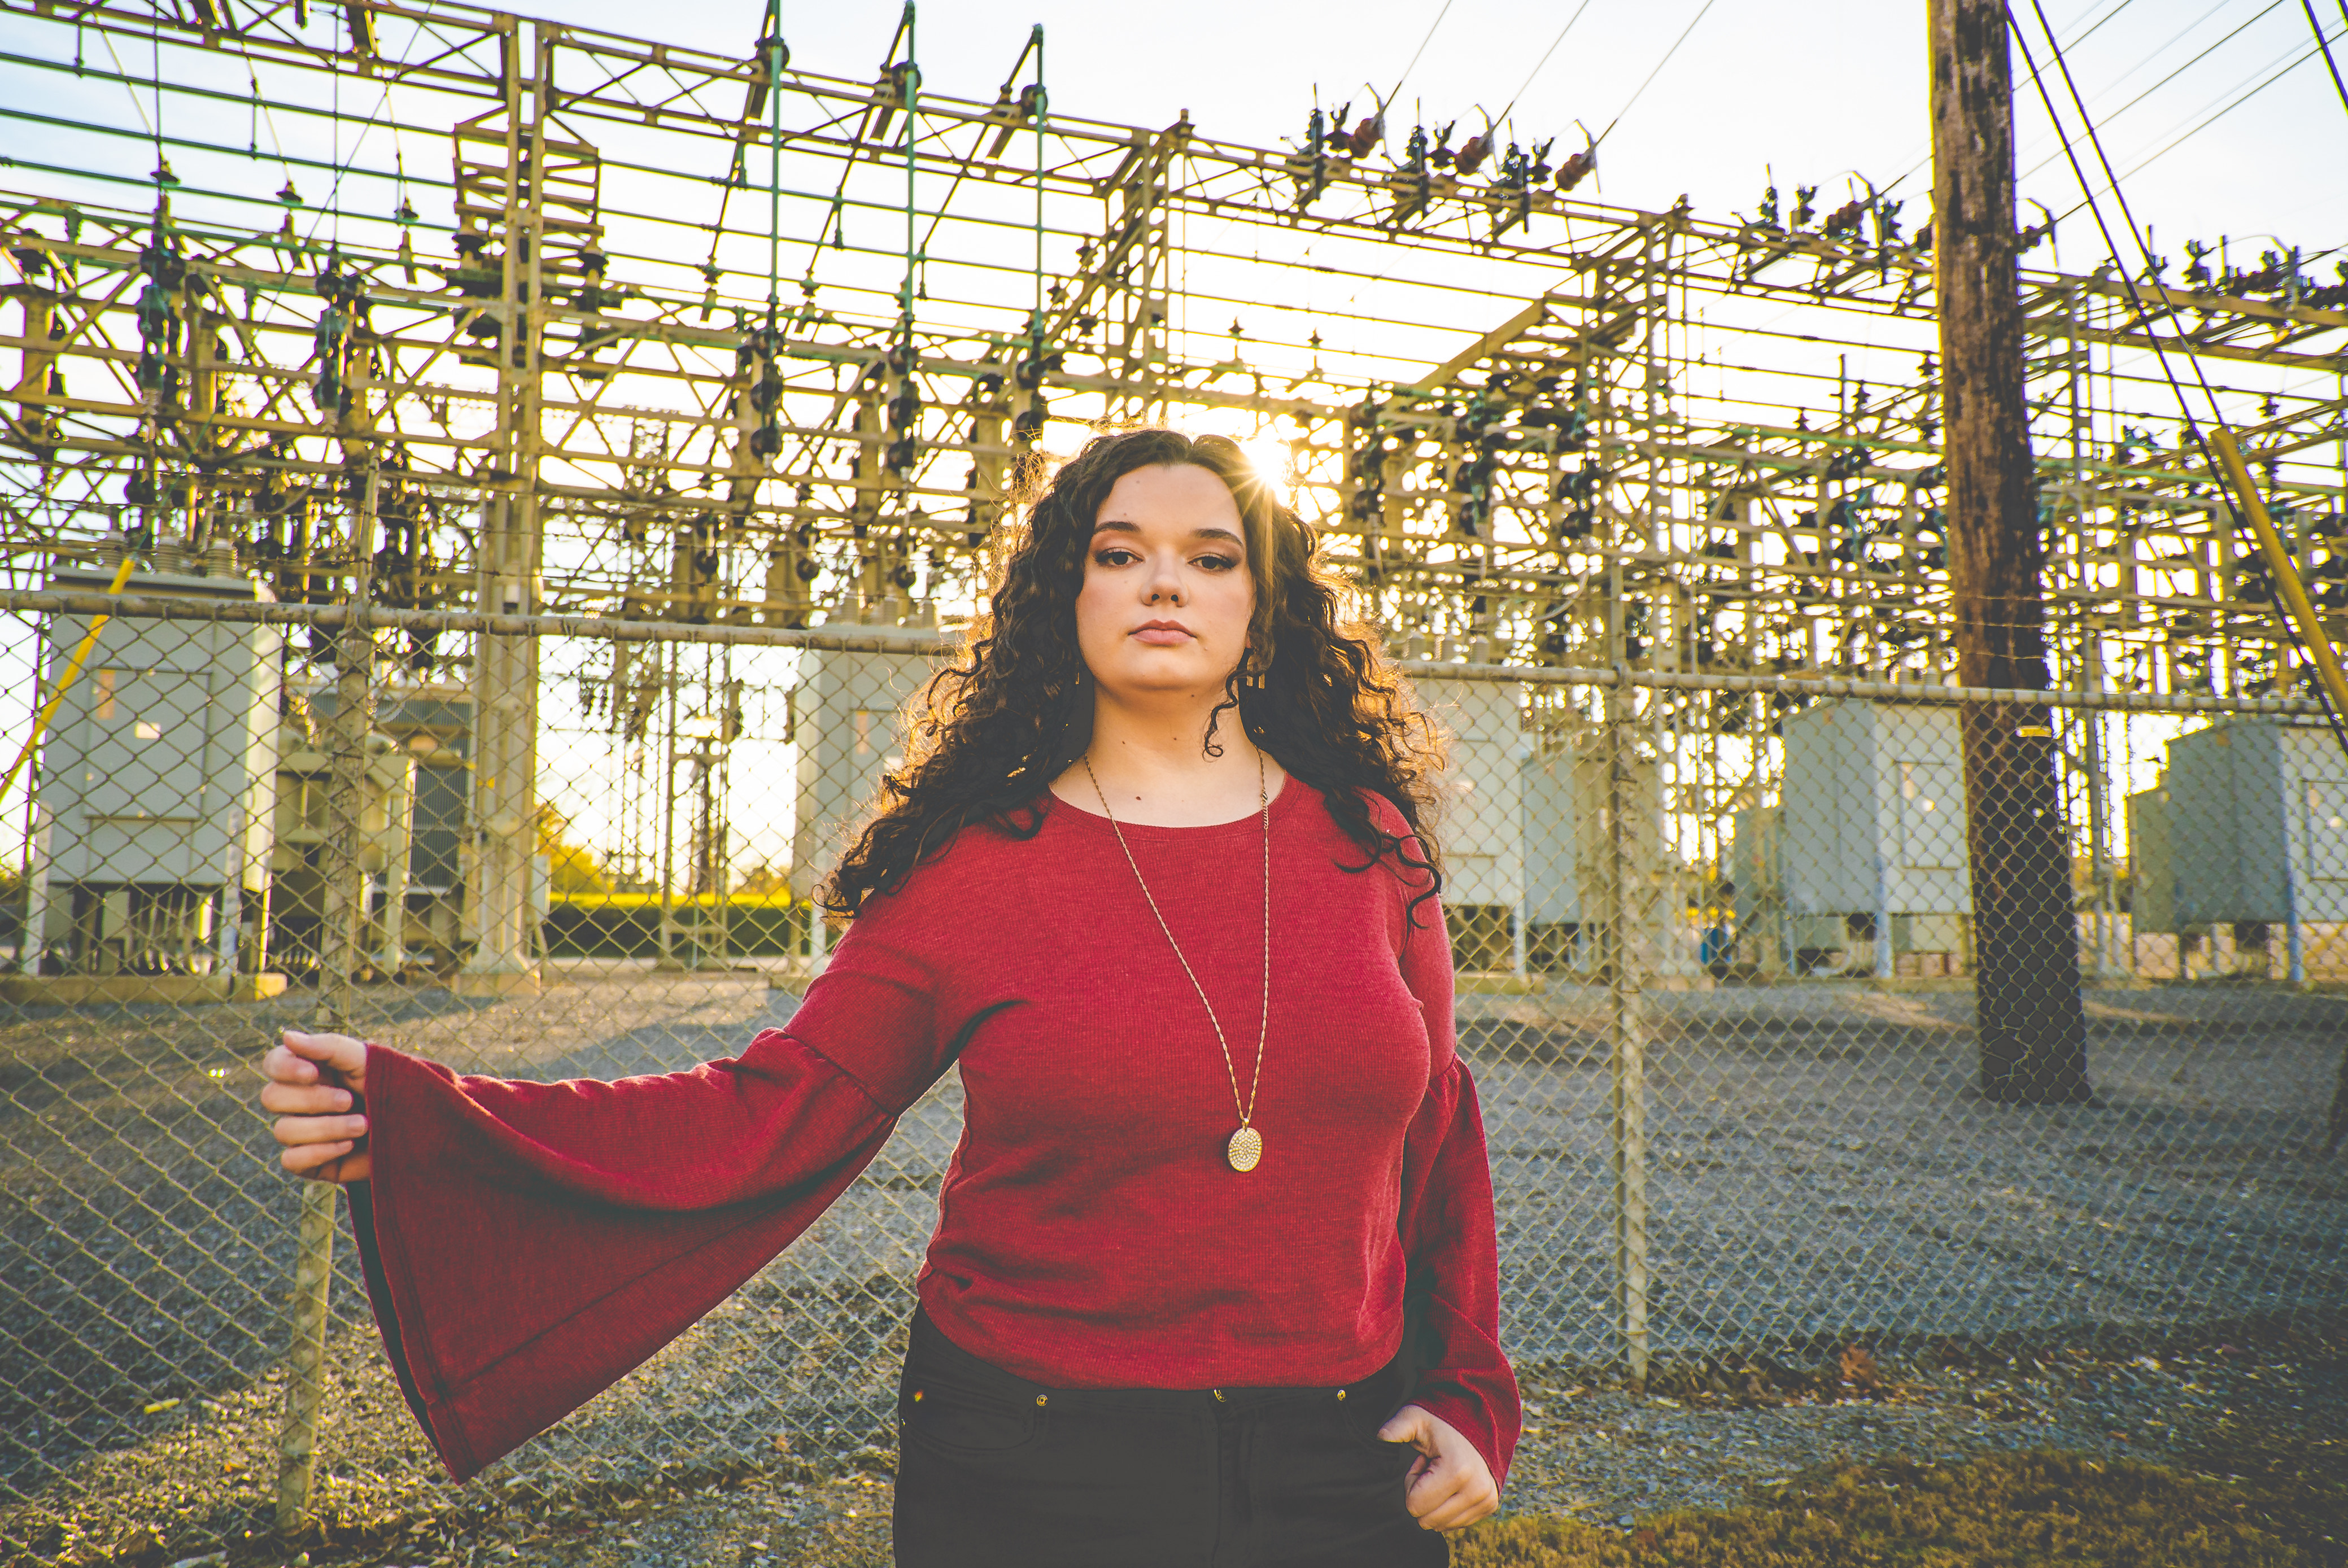 Indie Artist Katie Power On Award Nomination, Love Of Disney, And New Single “Led Me On”